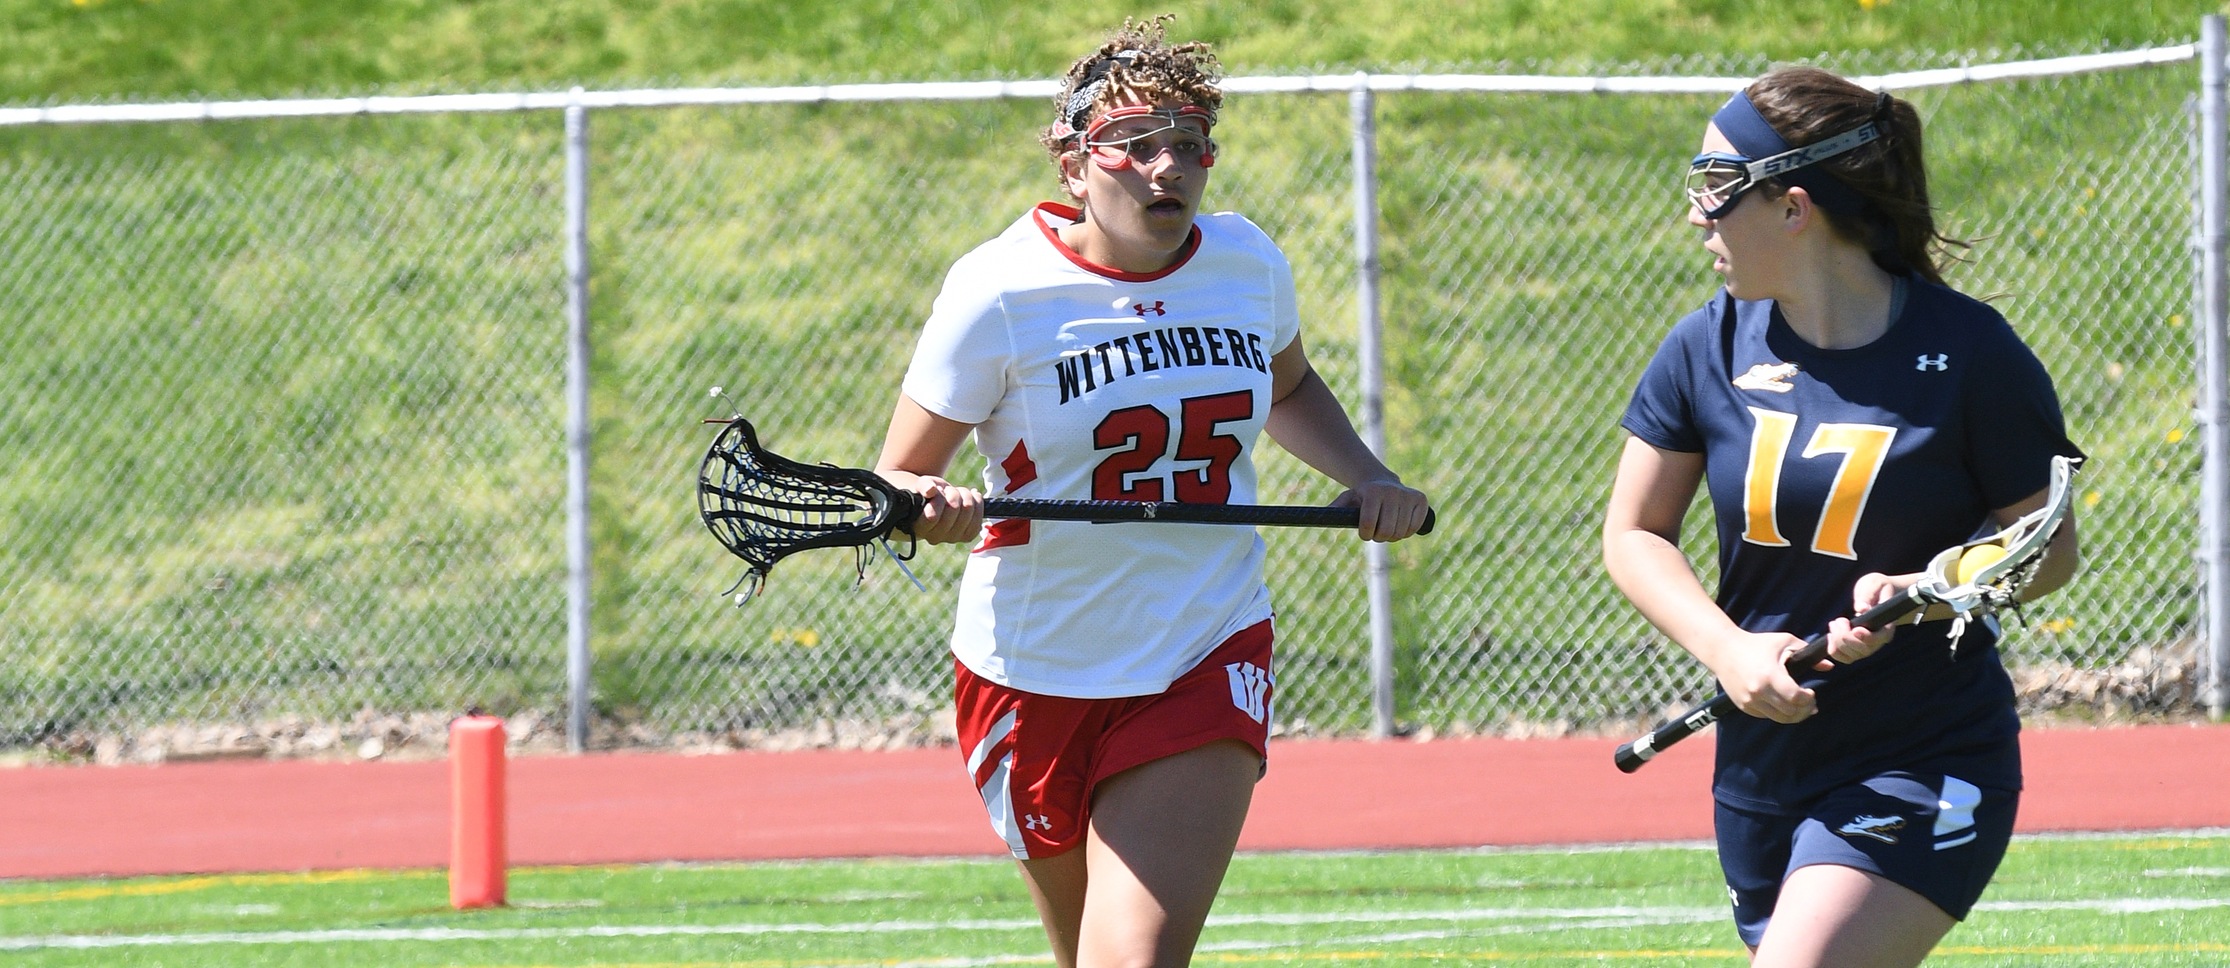 Wittenberg Powers Past OWU 22-12